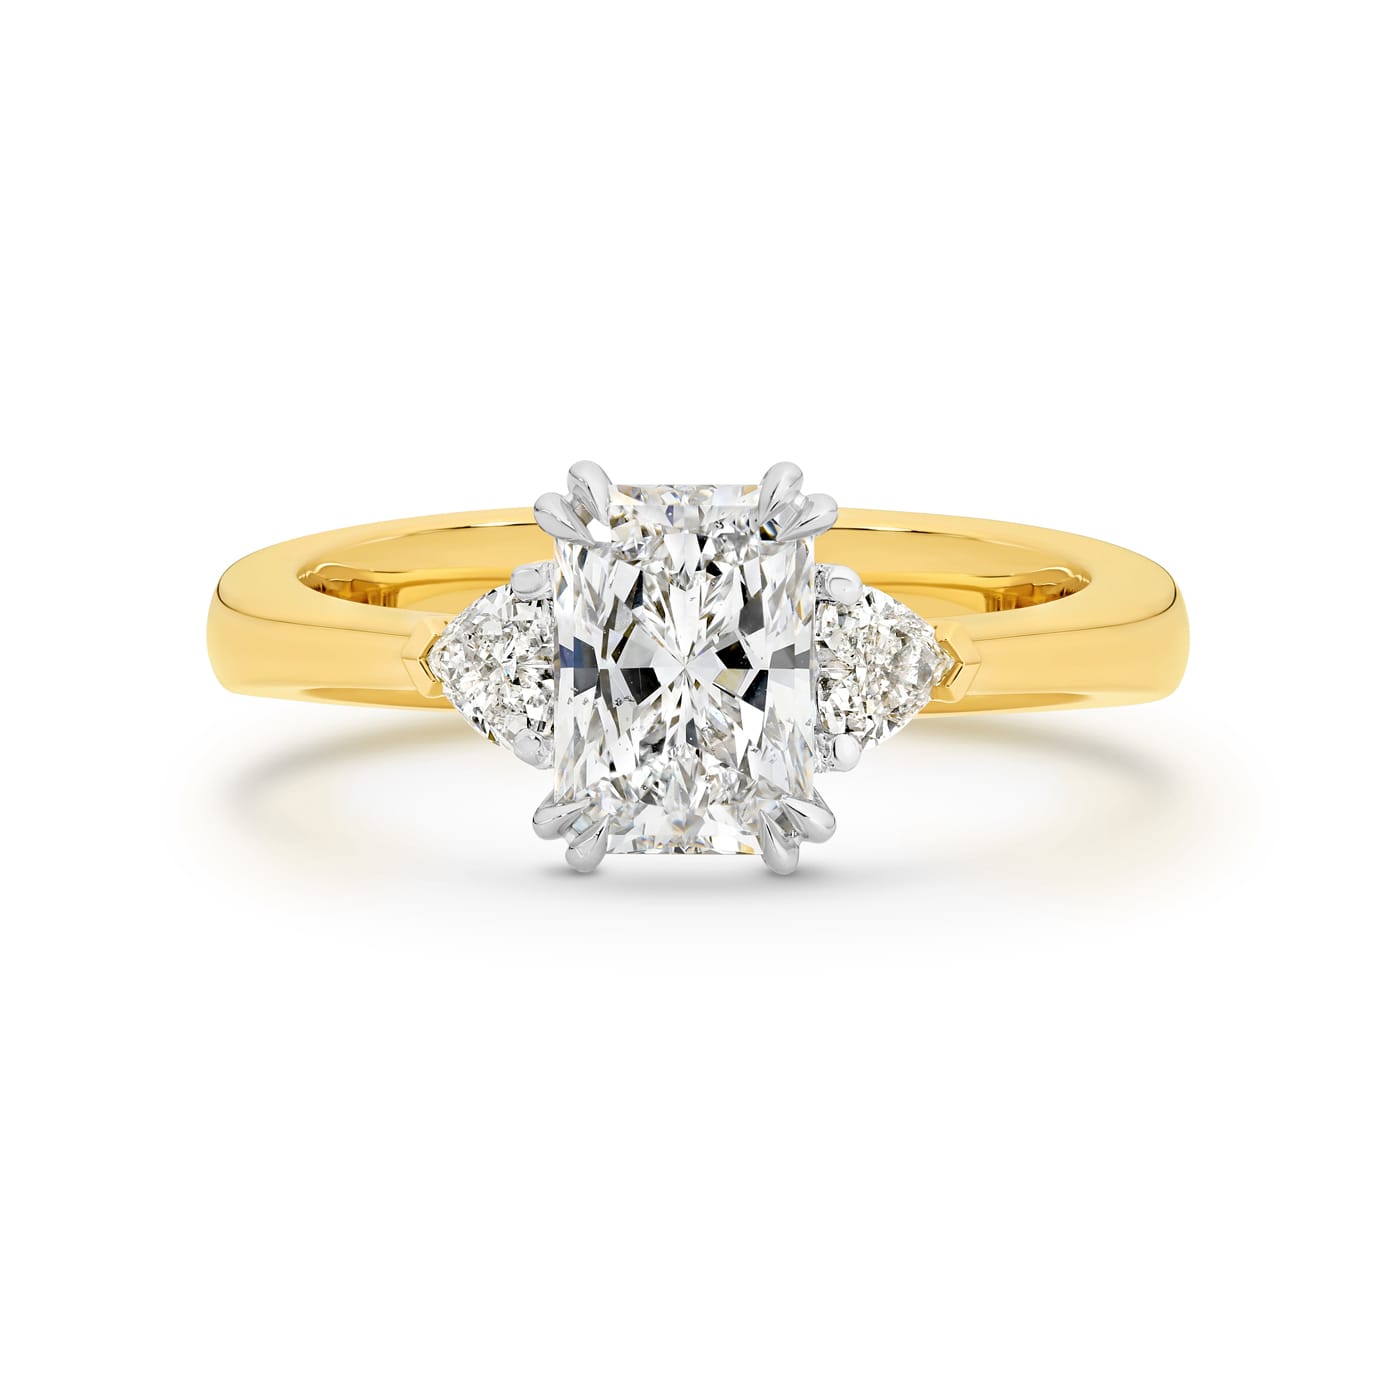 Sierra features a 1.50ct GIA Certified long radiant cut centre diamond, beautifully proportioned on either side with 2 heart shaped diamonds totalling 0.34ct. Handcrafted in 18ct yellow and white gold, she was designed and handcrafted by LeGassick's Master Jewellers, Gold Coast, Australia.